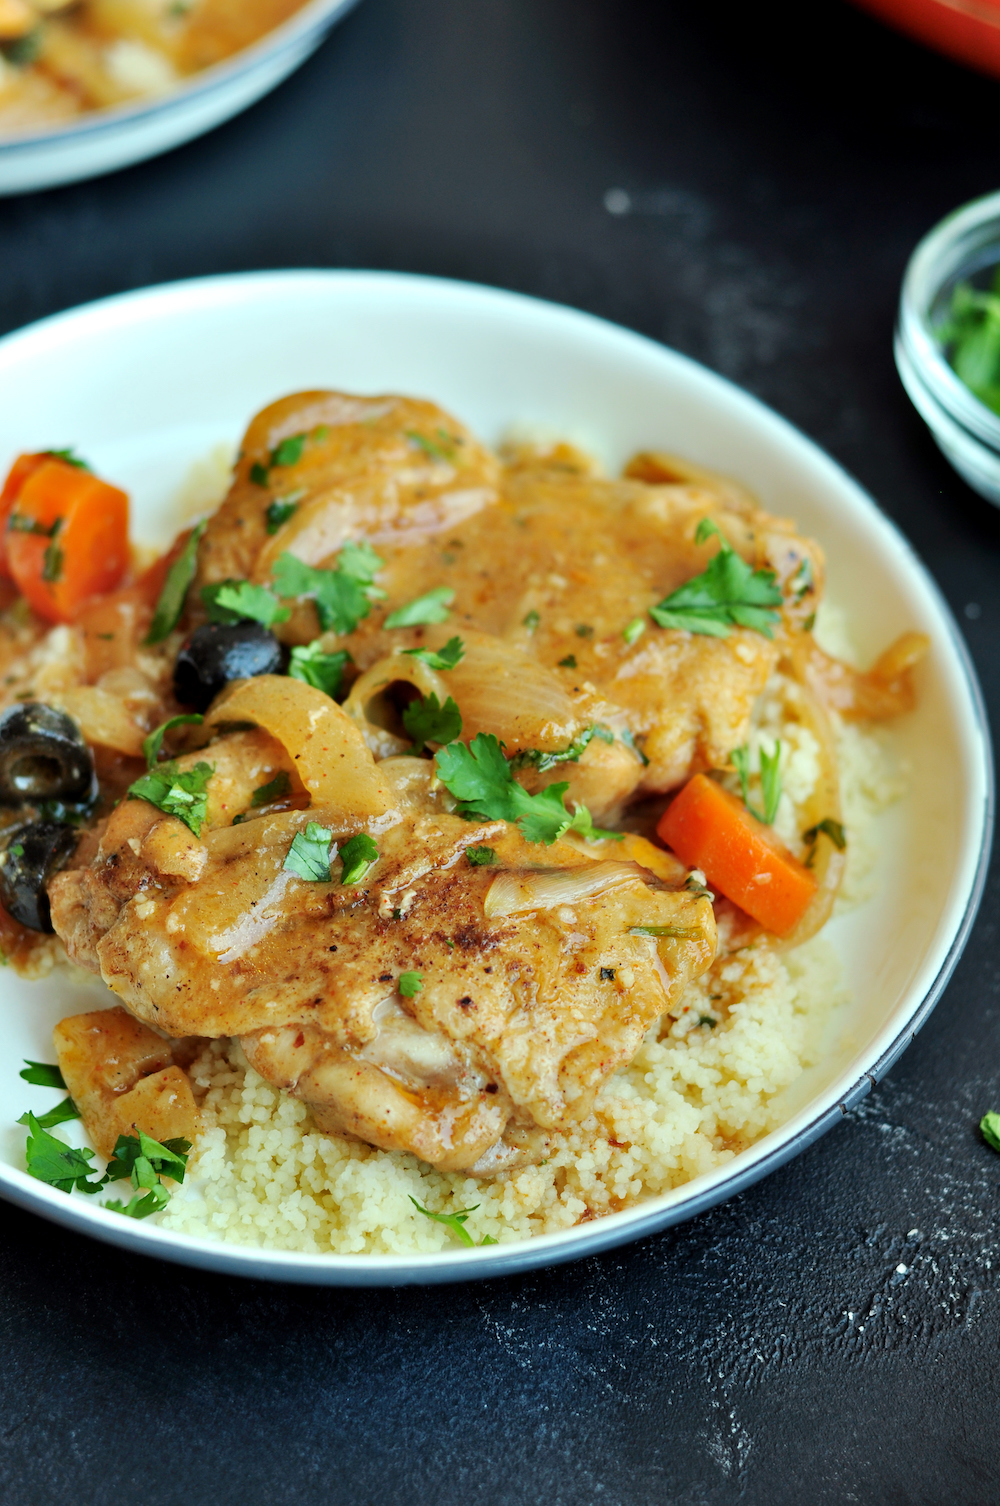 Moroccan-Style Sous Vide Chicken Thighs (Chicken Tagine)